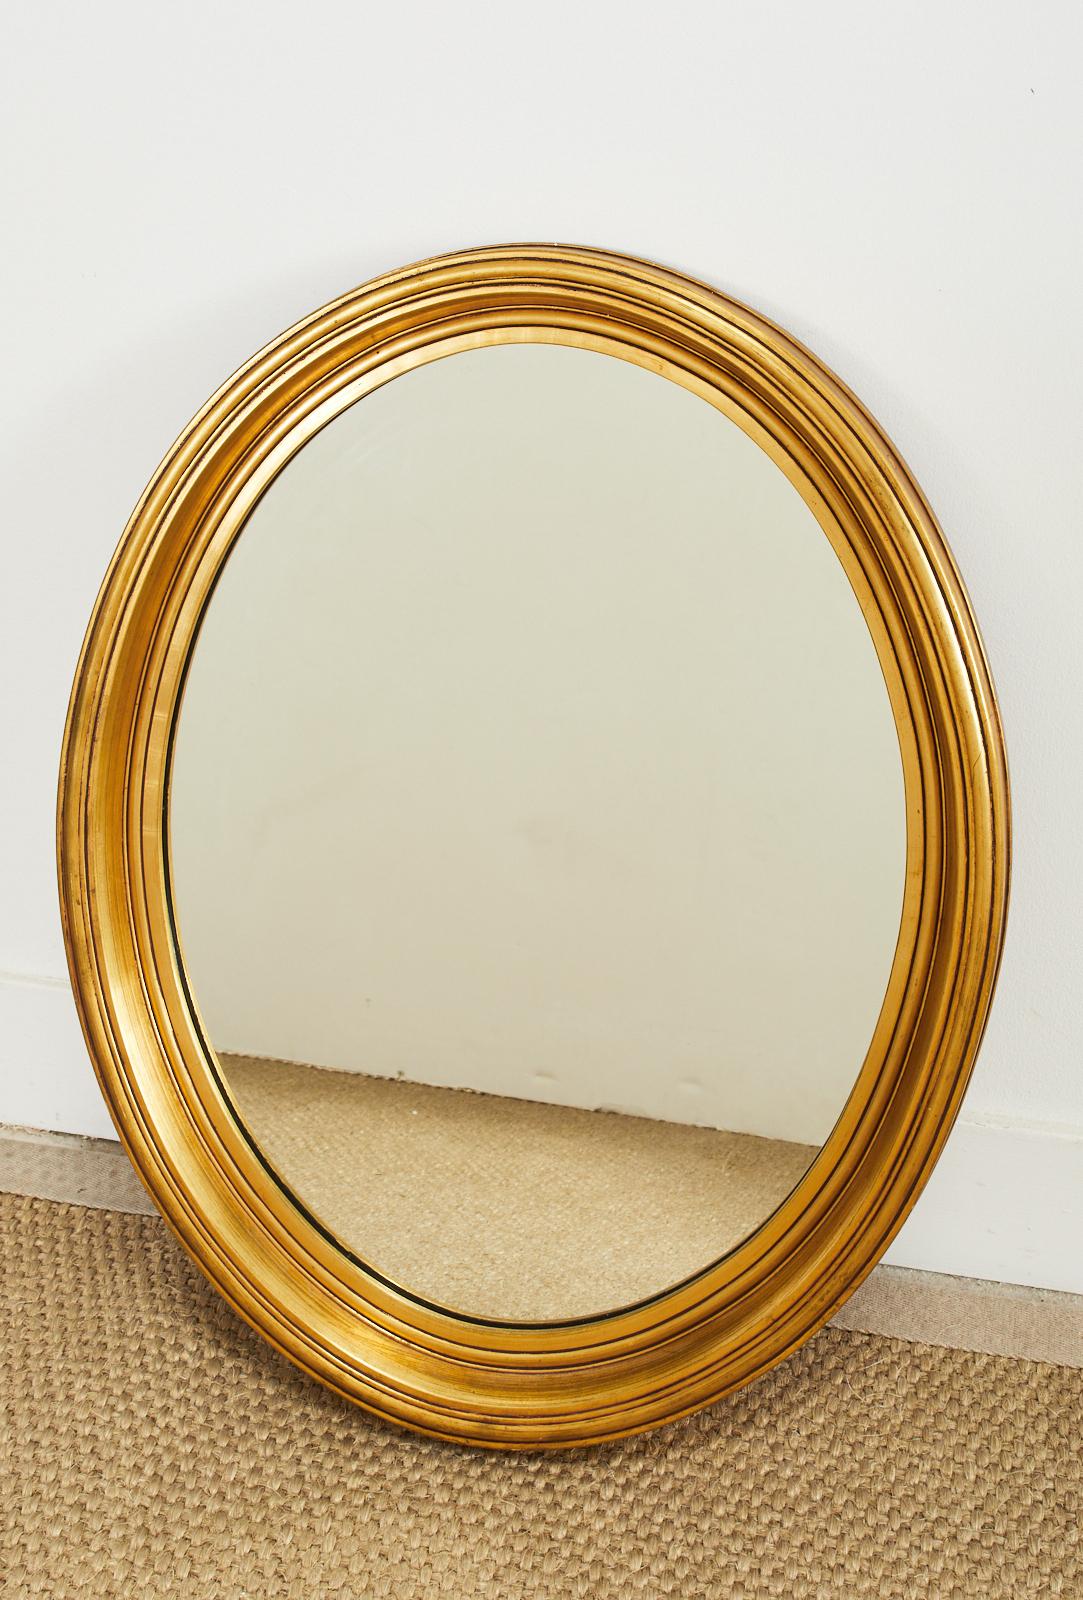 Gorgeous oval giltwood wall mirror crafted in the mid-century by Falconer Plate Glass Co., NYC. The mirror is made in the French Louis Philippe taste with a clean design free from elaborate decoration. The mirror can be hung horizontally or